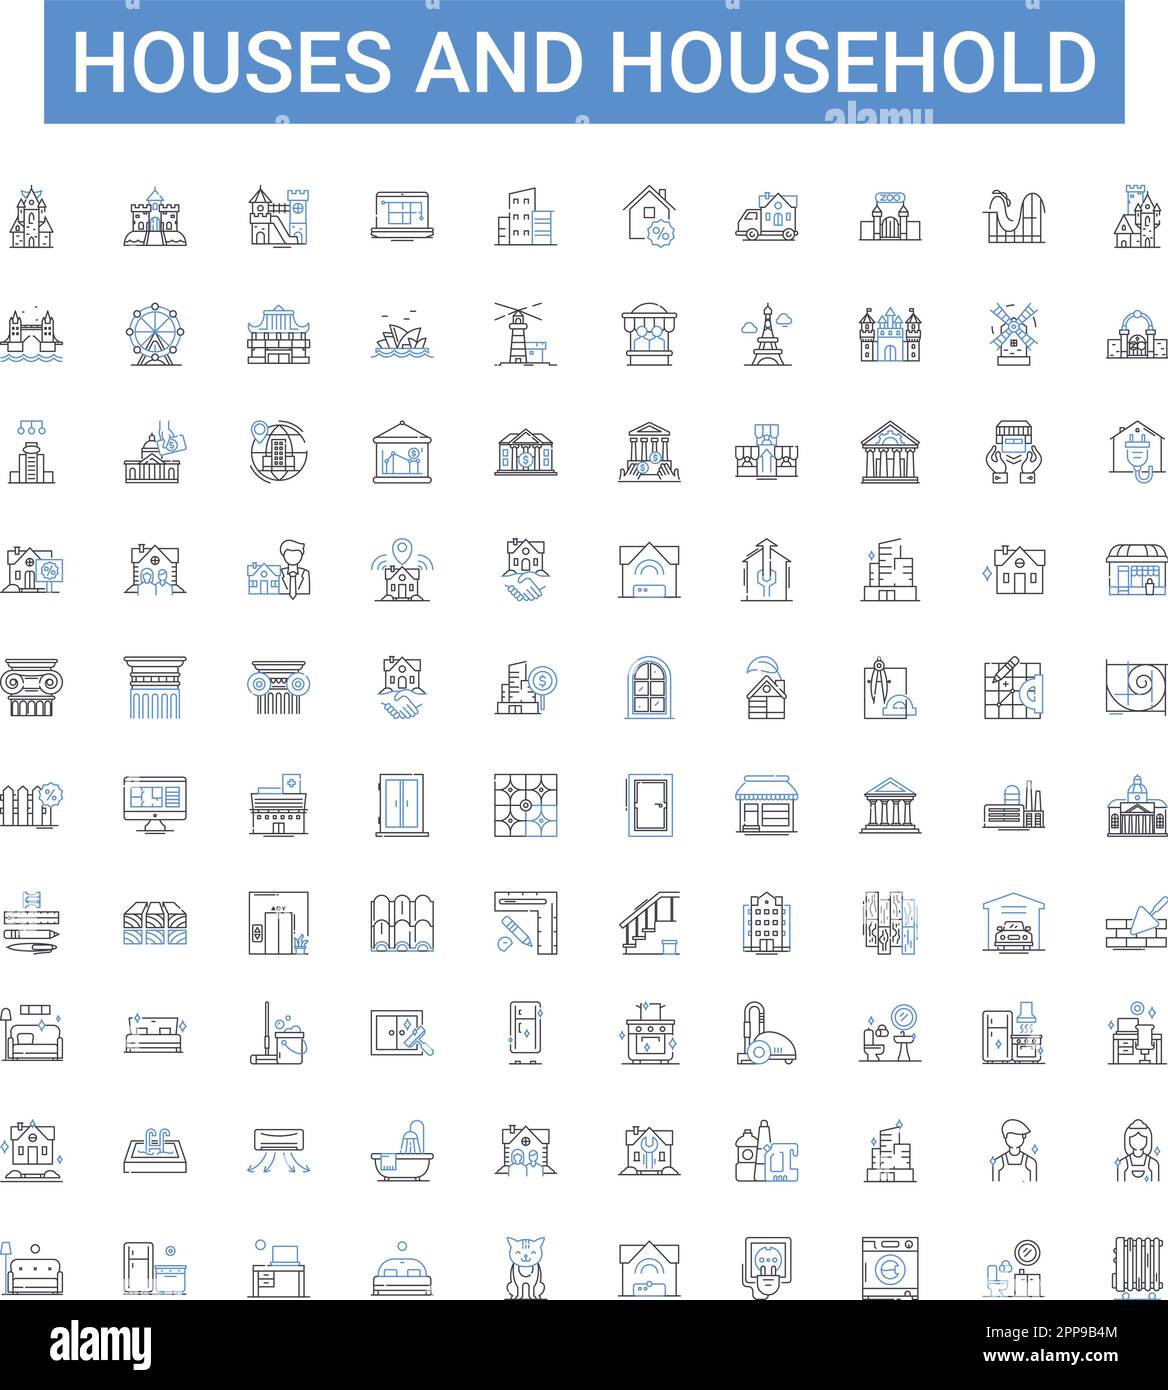 Houses and household outline icons collection. House, Household, Home, Dwelling, Residence, Abode, Villa vector illustration set. Cottage, Condo Stock Vector